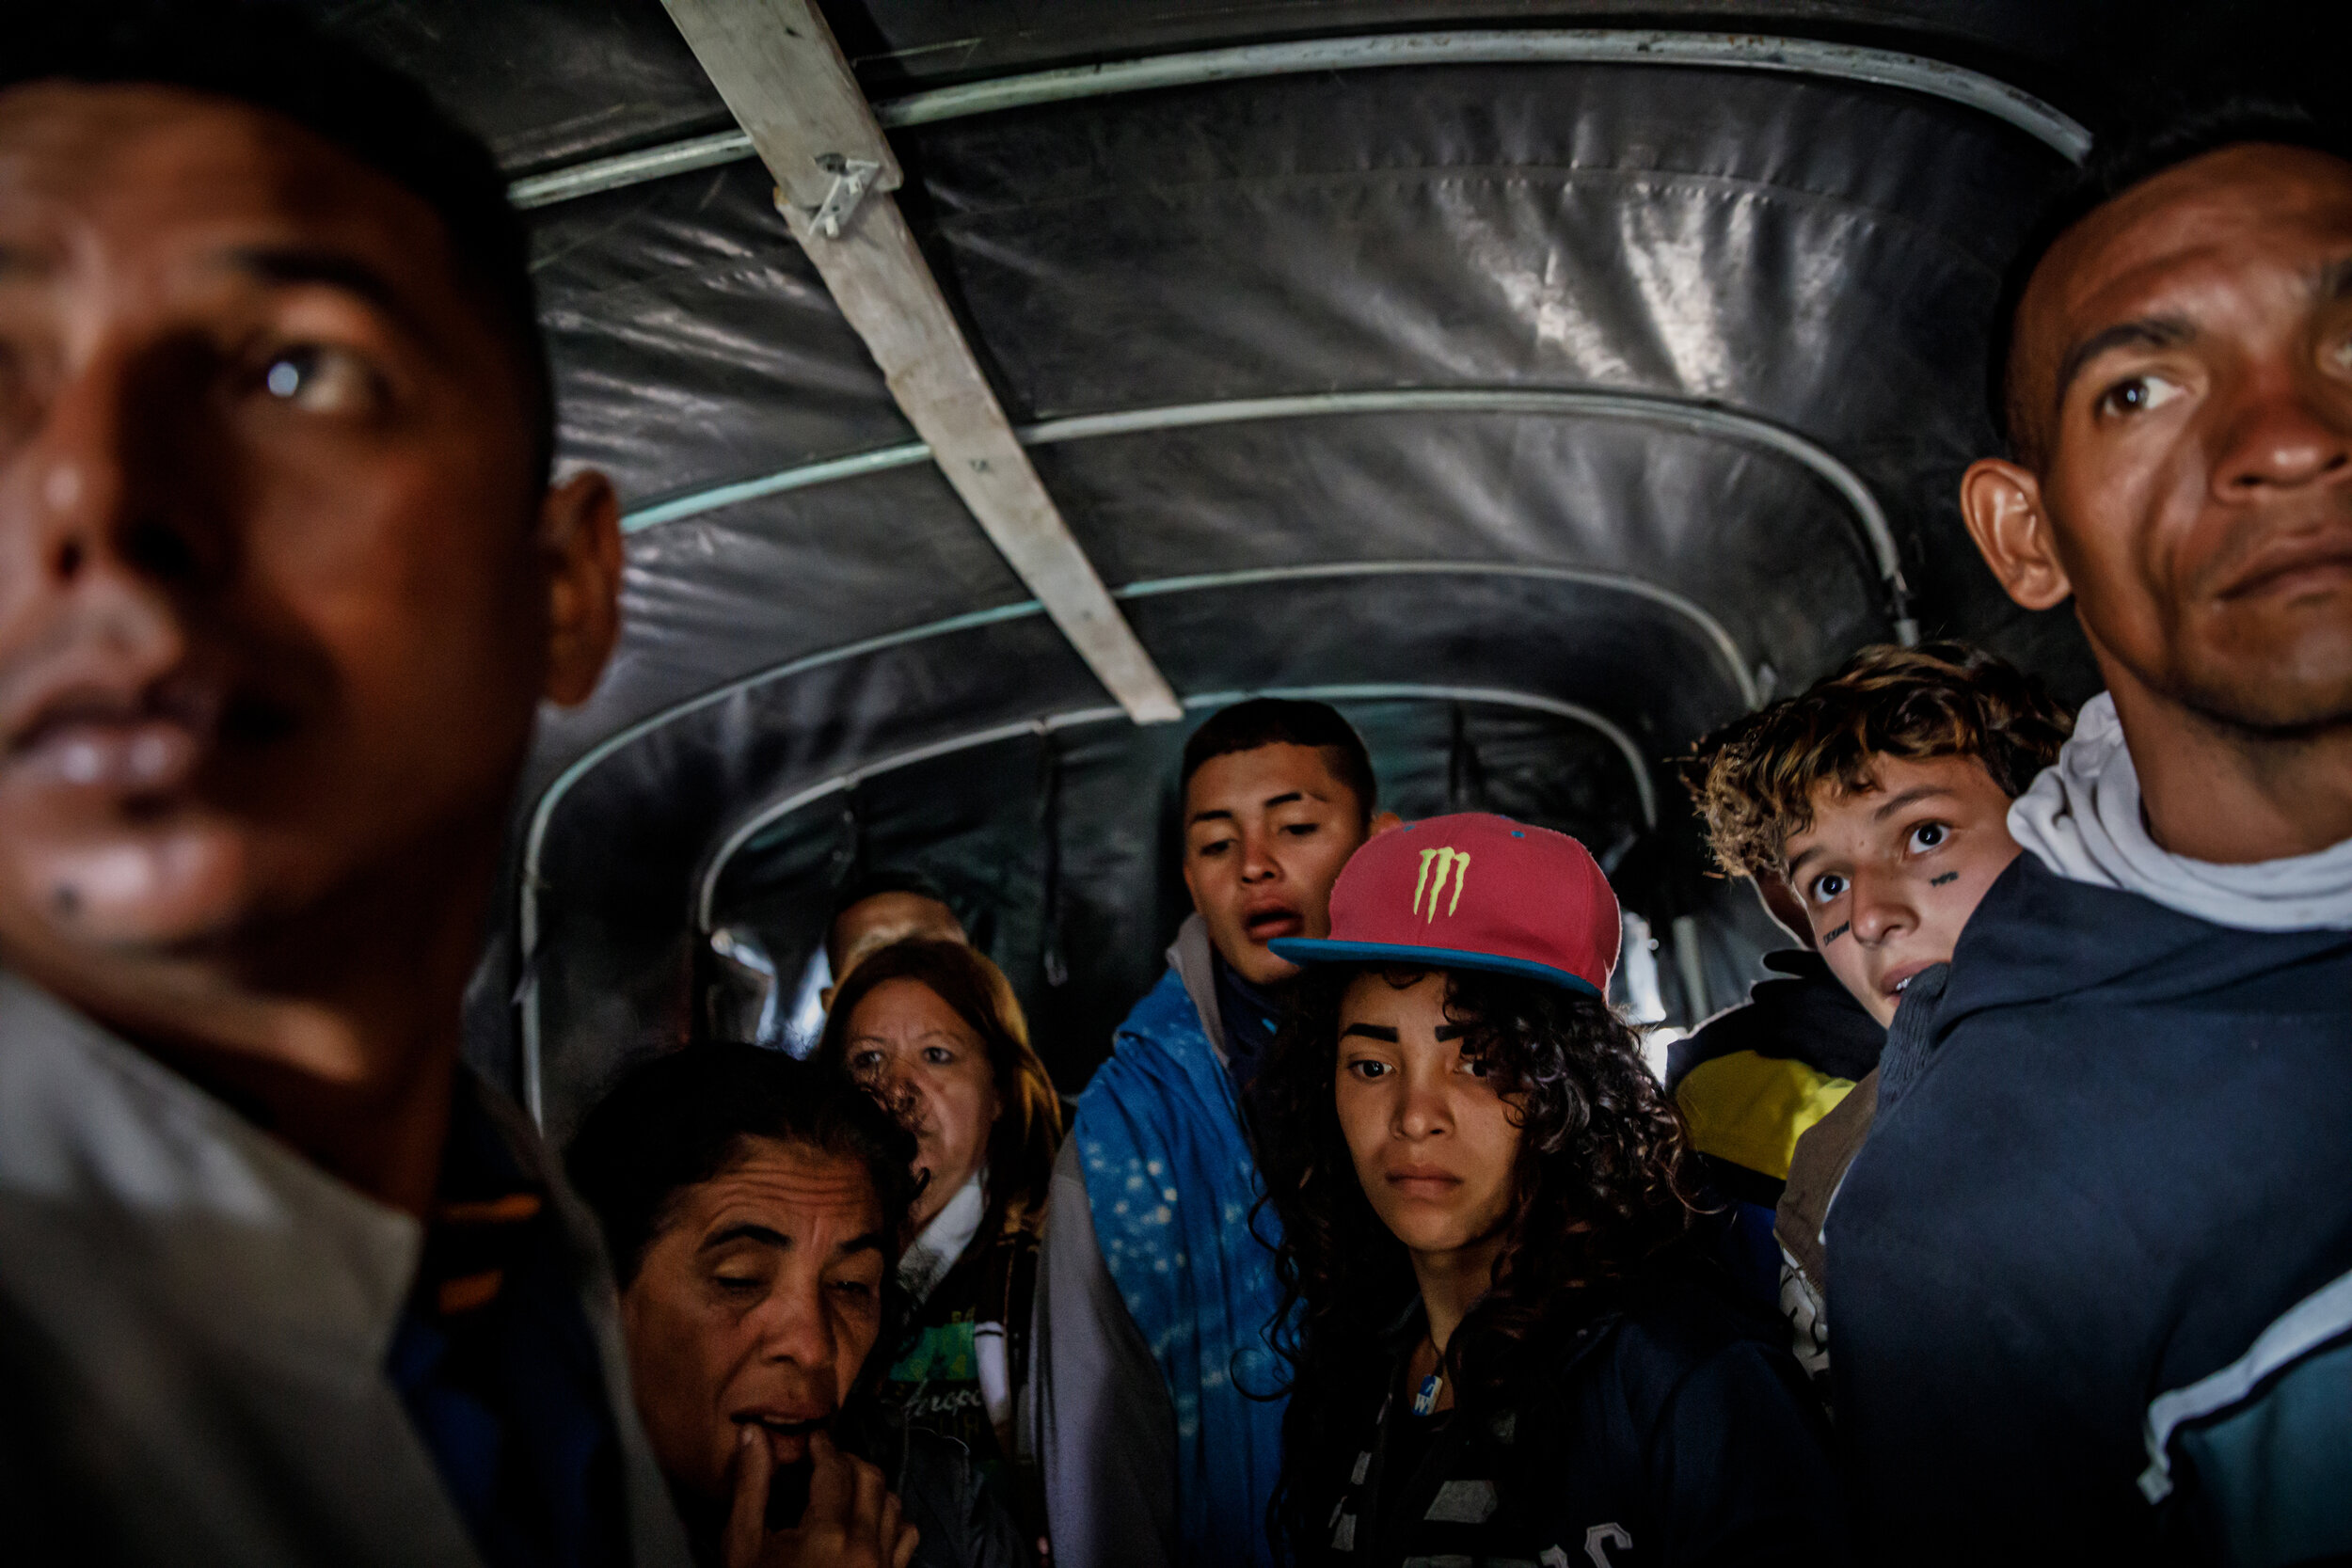  Wilvelis Pacheco 13, center right, and other Venezuelan migrants look on as a truck drive closes the tarp to cover the rear to avoid getting caught by the authorities. The truck is ferrying across the cold plateau, known as El Pramo de Berl’n the mo